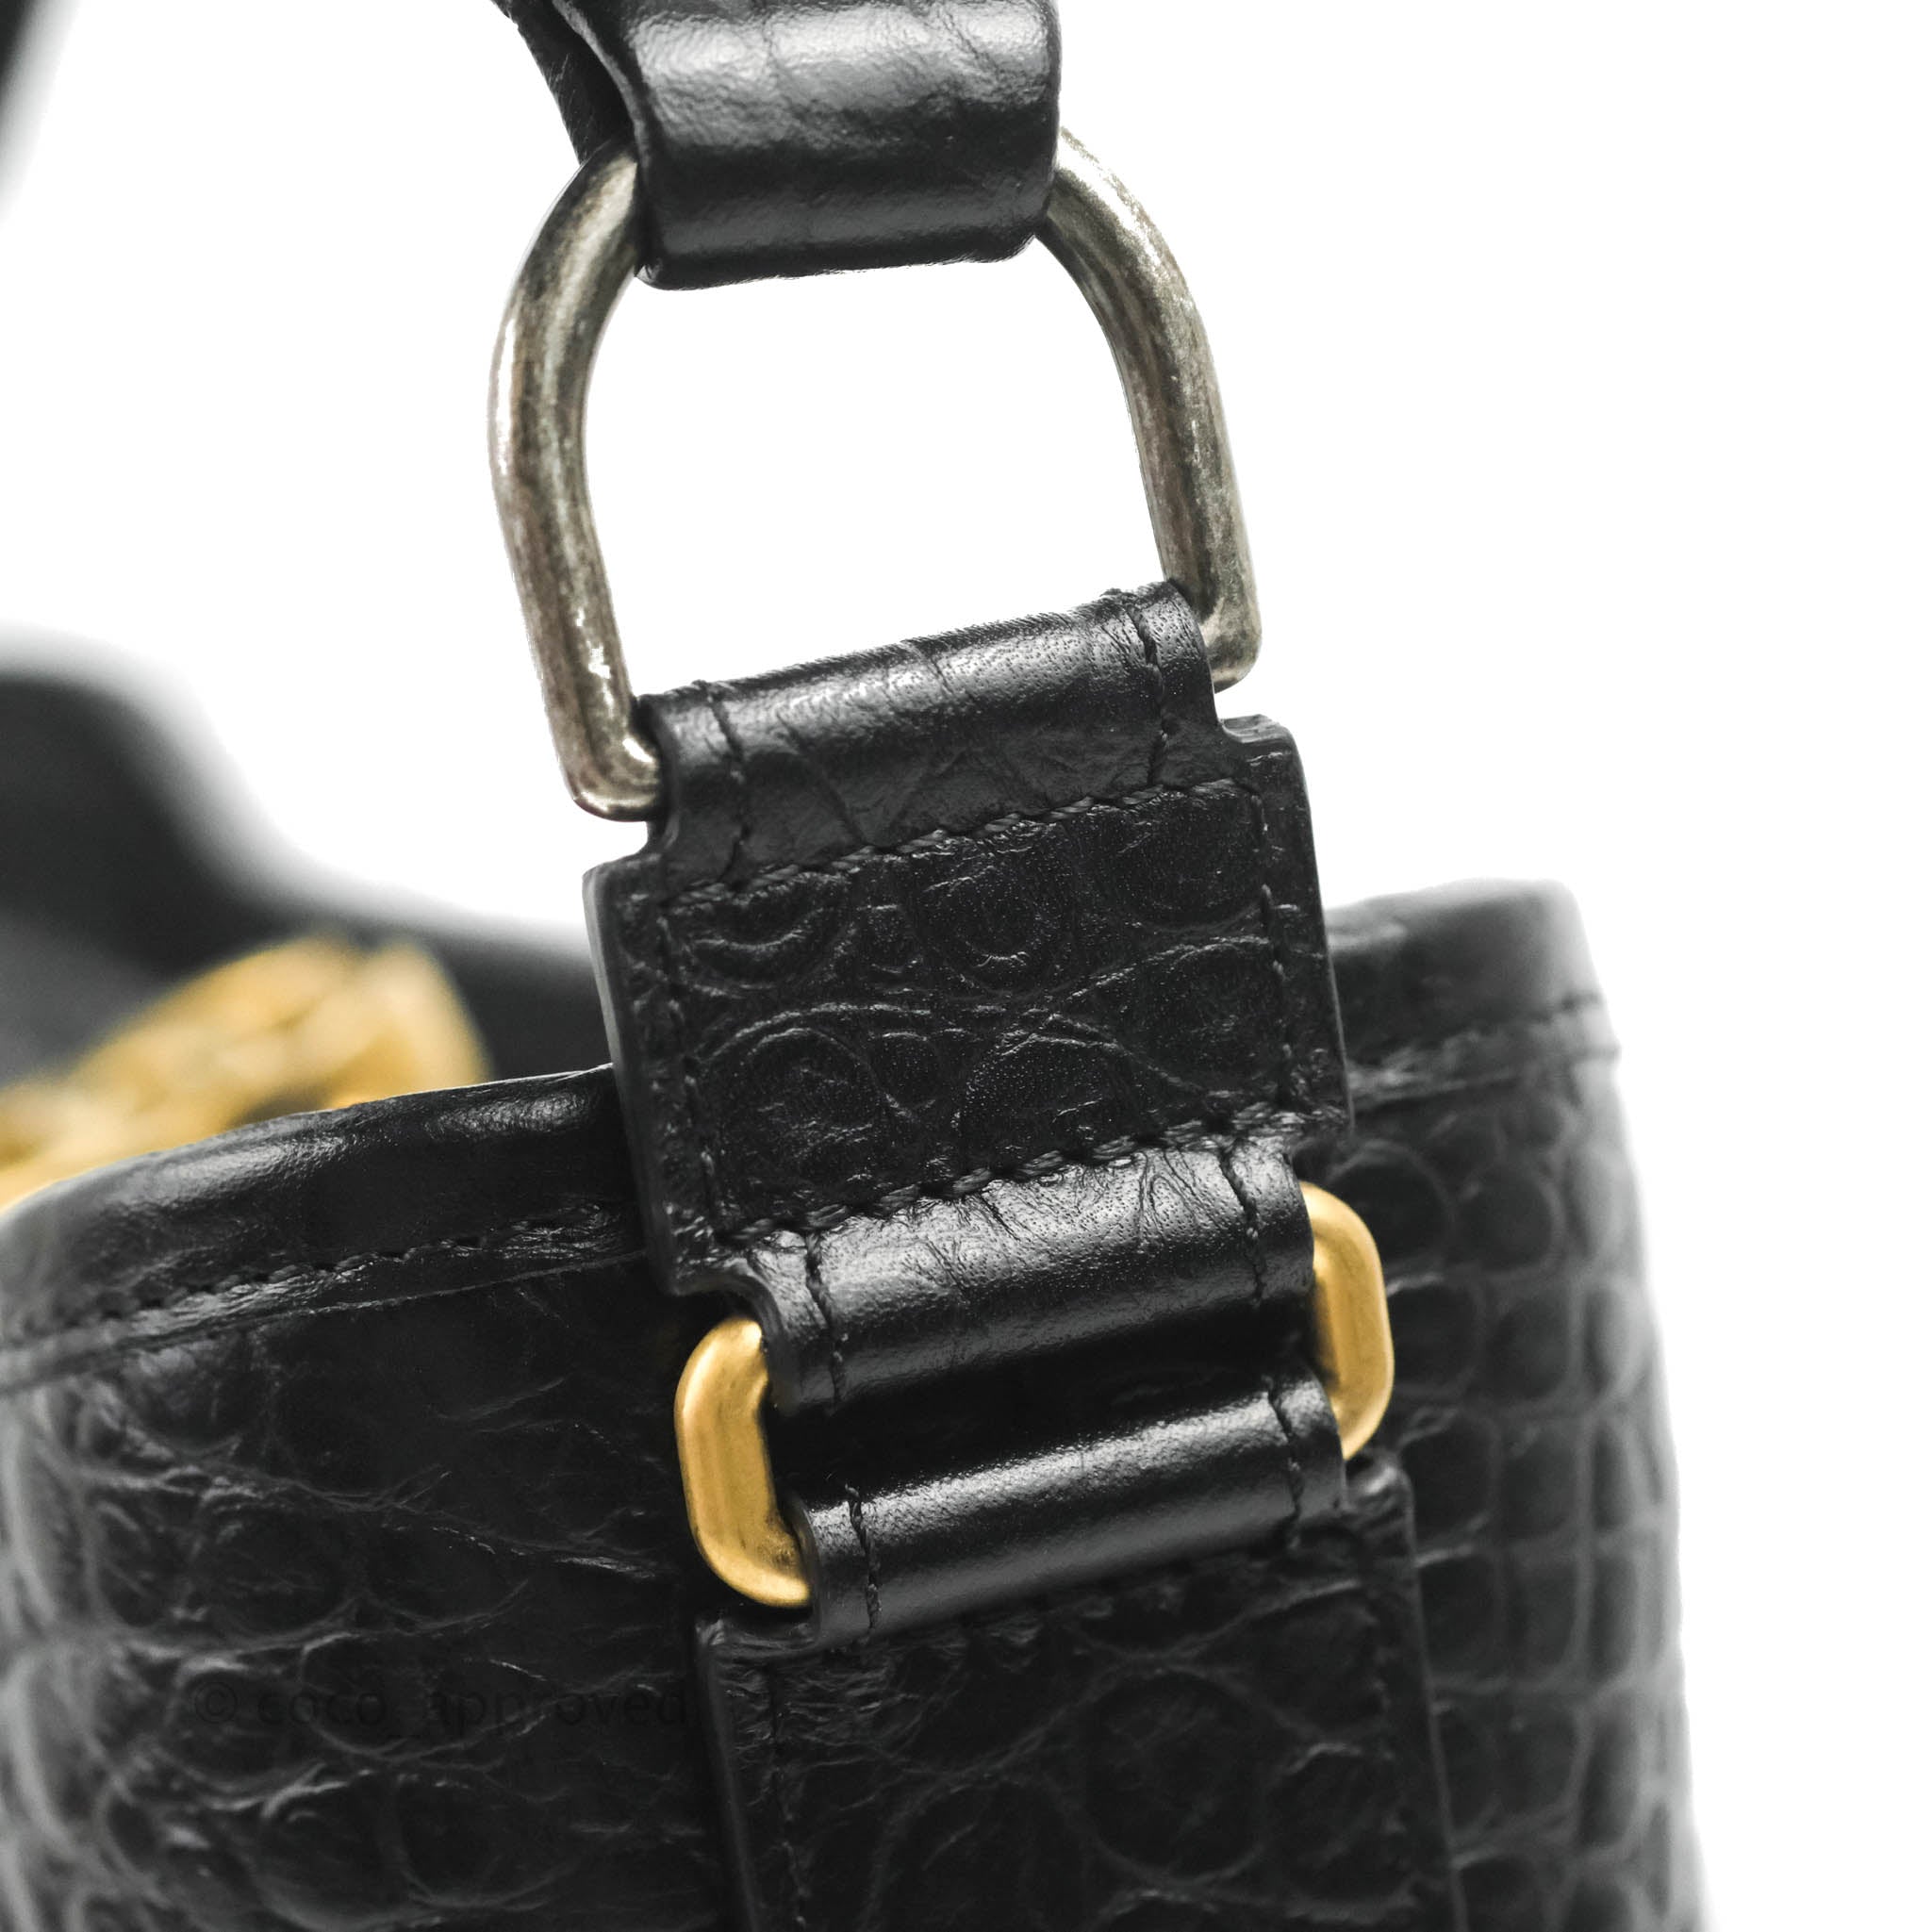 Chanel Large Gabrielle Hobo Crocodile Embossed Black Calfskin – Coco  Approved Studio